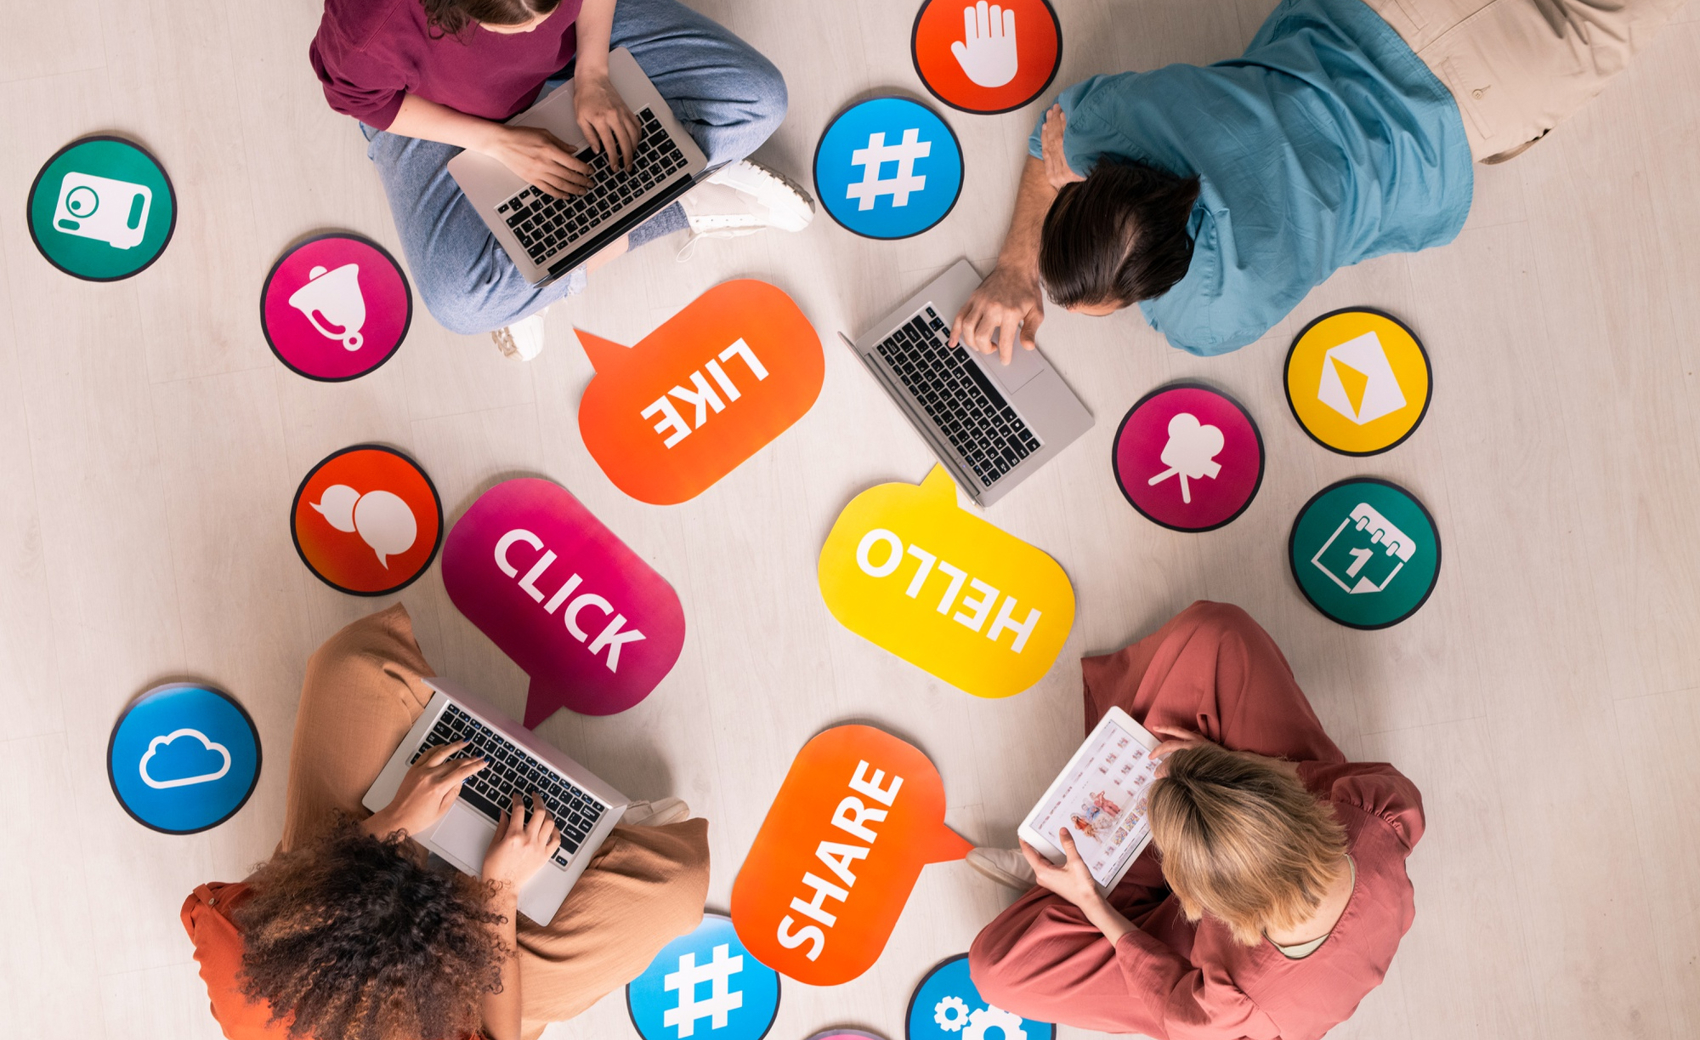 View Internet Users Sitting Circle Among Social Media Activity Tags Icons Surfing Net Devices